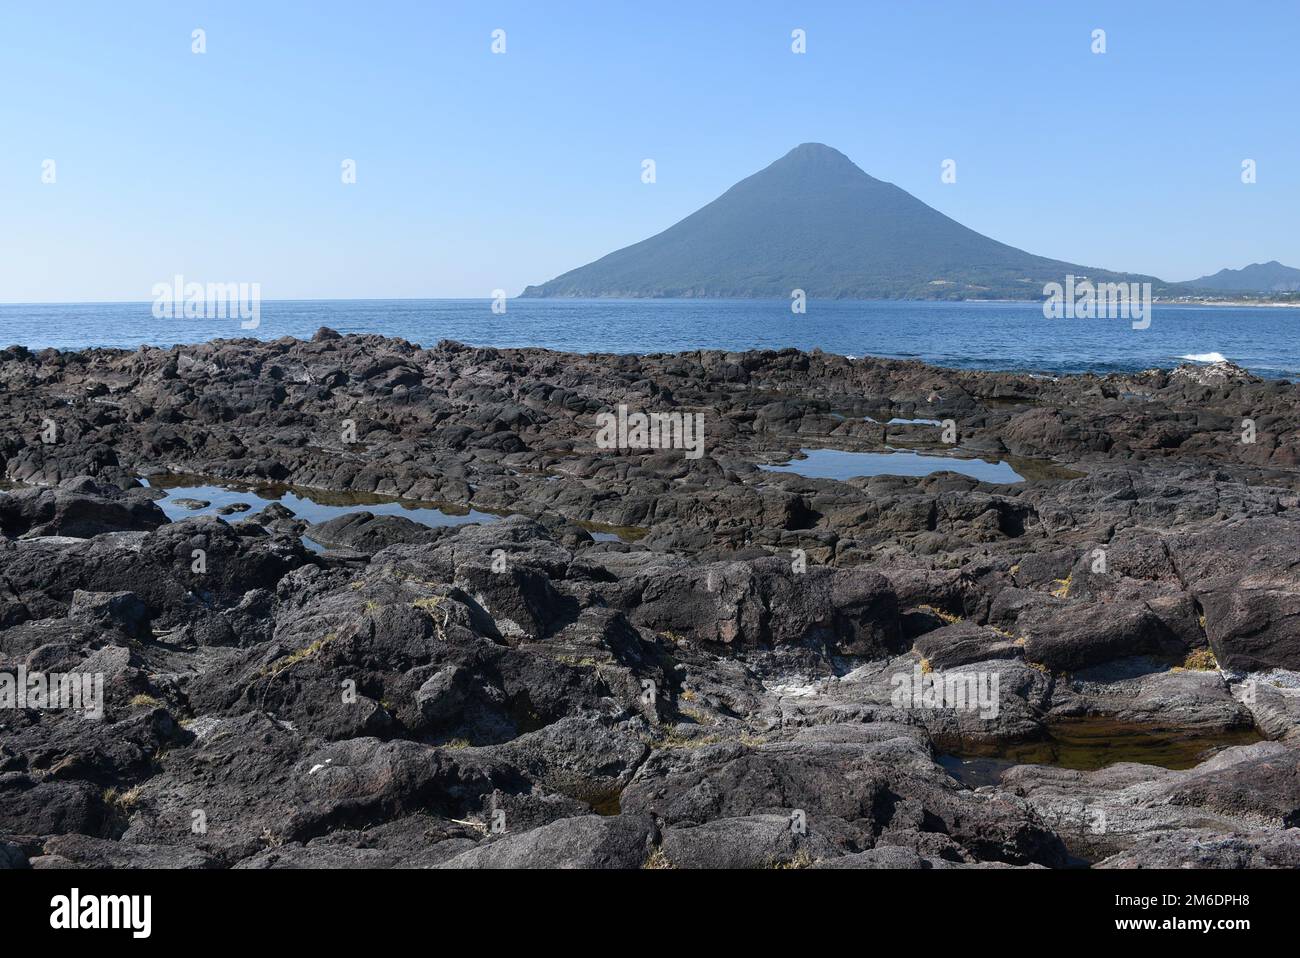 View of famous volcano Kaimondake in the south part of Japan, Kagoshima Prefecture, blue sky and great weather Stock Photo